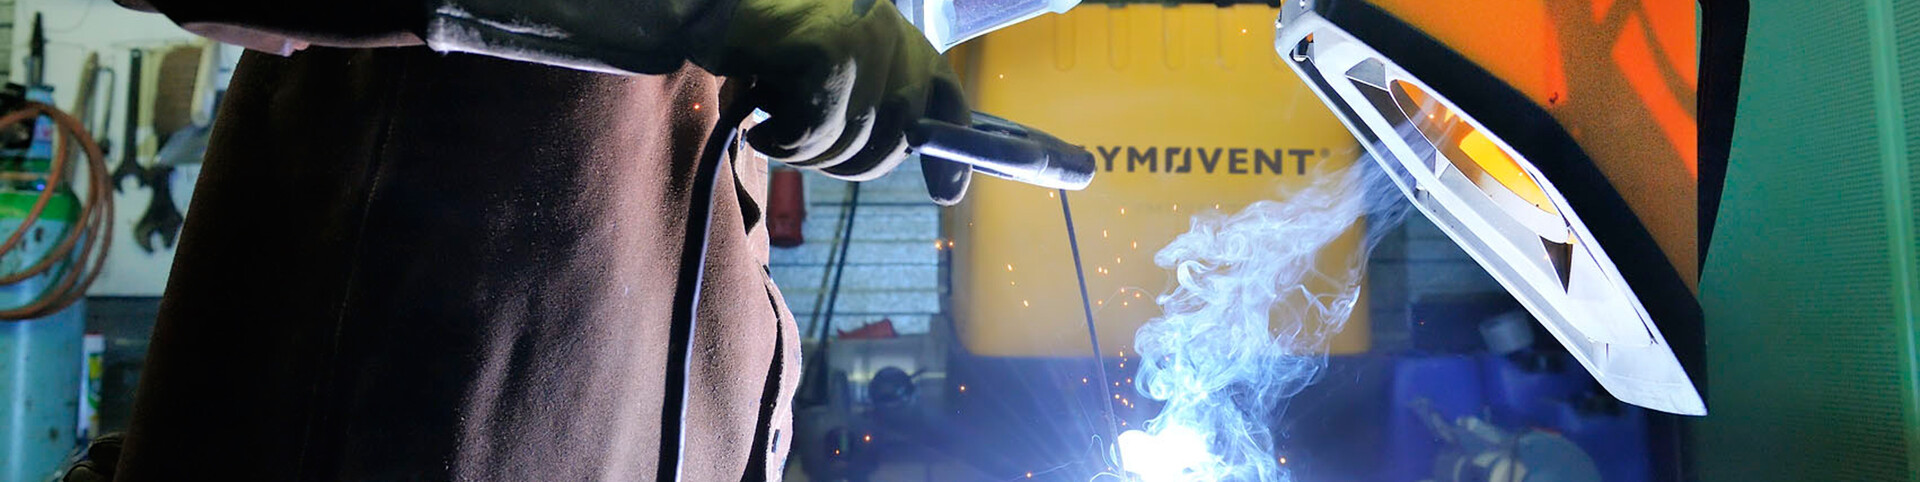 Welding fume removal with extraction arm